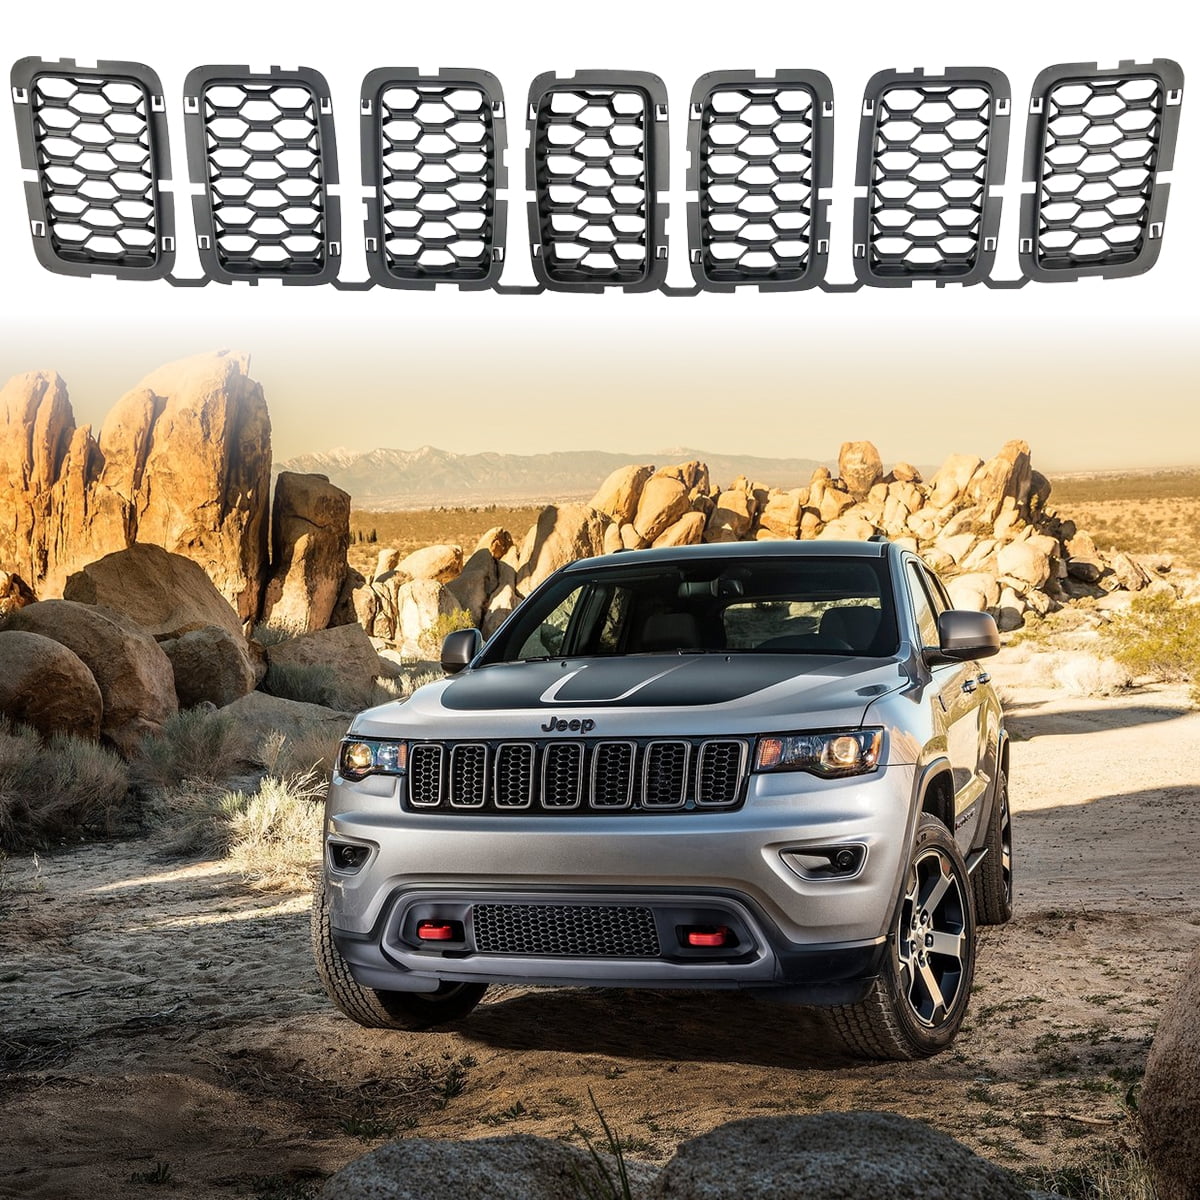 XBEEK Matte Black Honeycomb Front Grill Inserts Mesh Grille Fits 2017,  2018, 2019, 2020, 2021 Jeep Grand Cherokee 7PCS